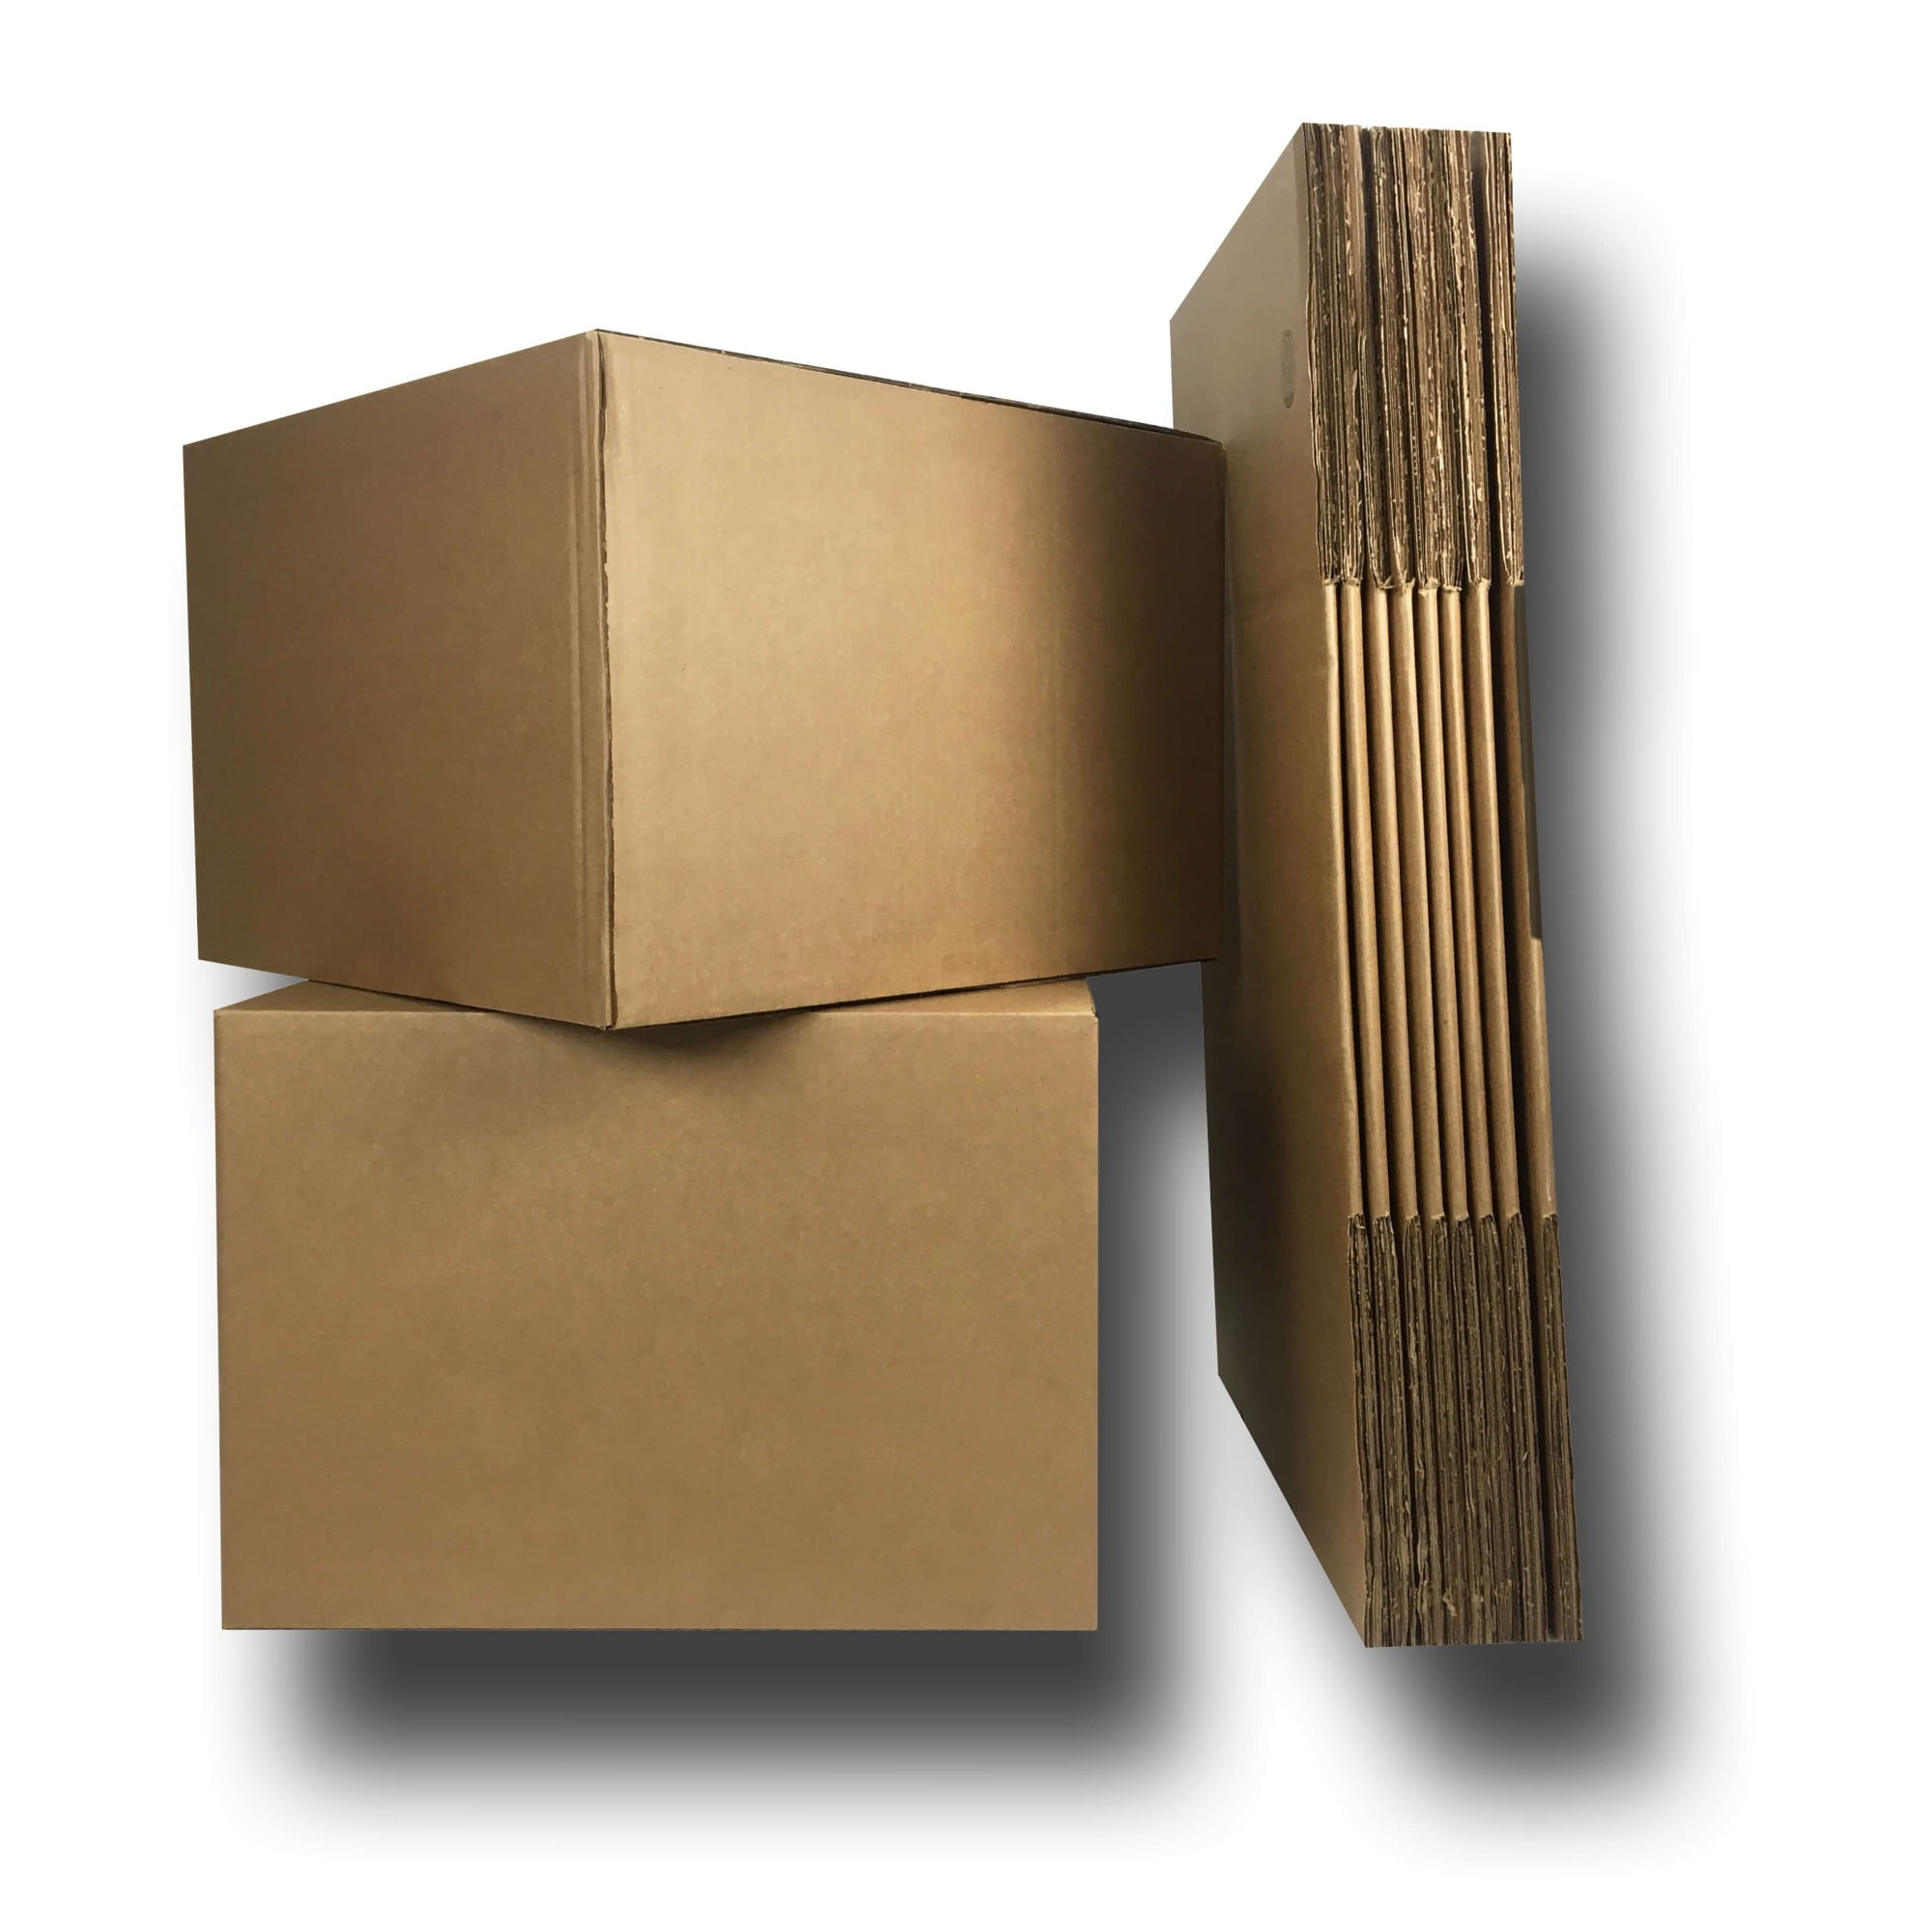  Extra Large Moving Boxes (Pack of 10) 23”x23”x16